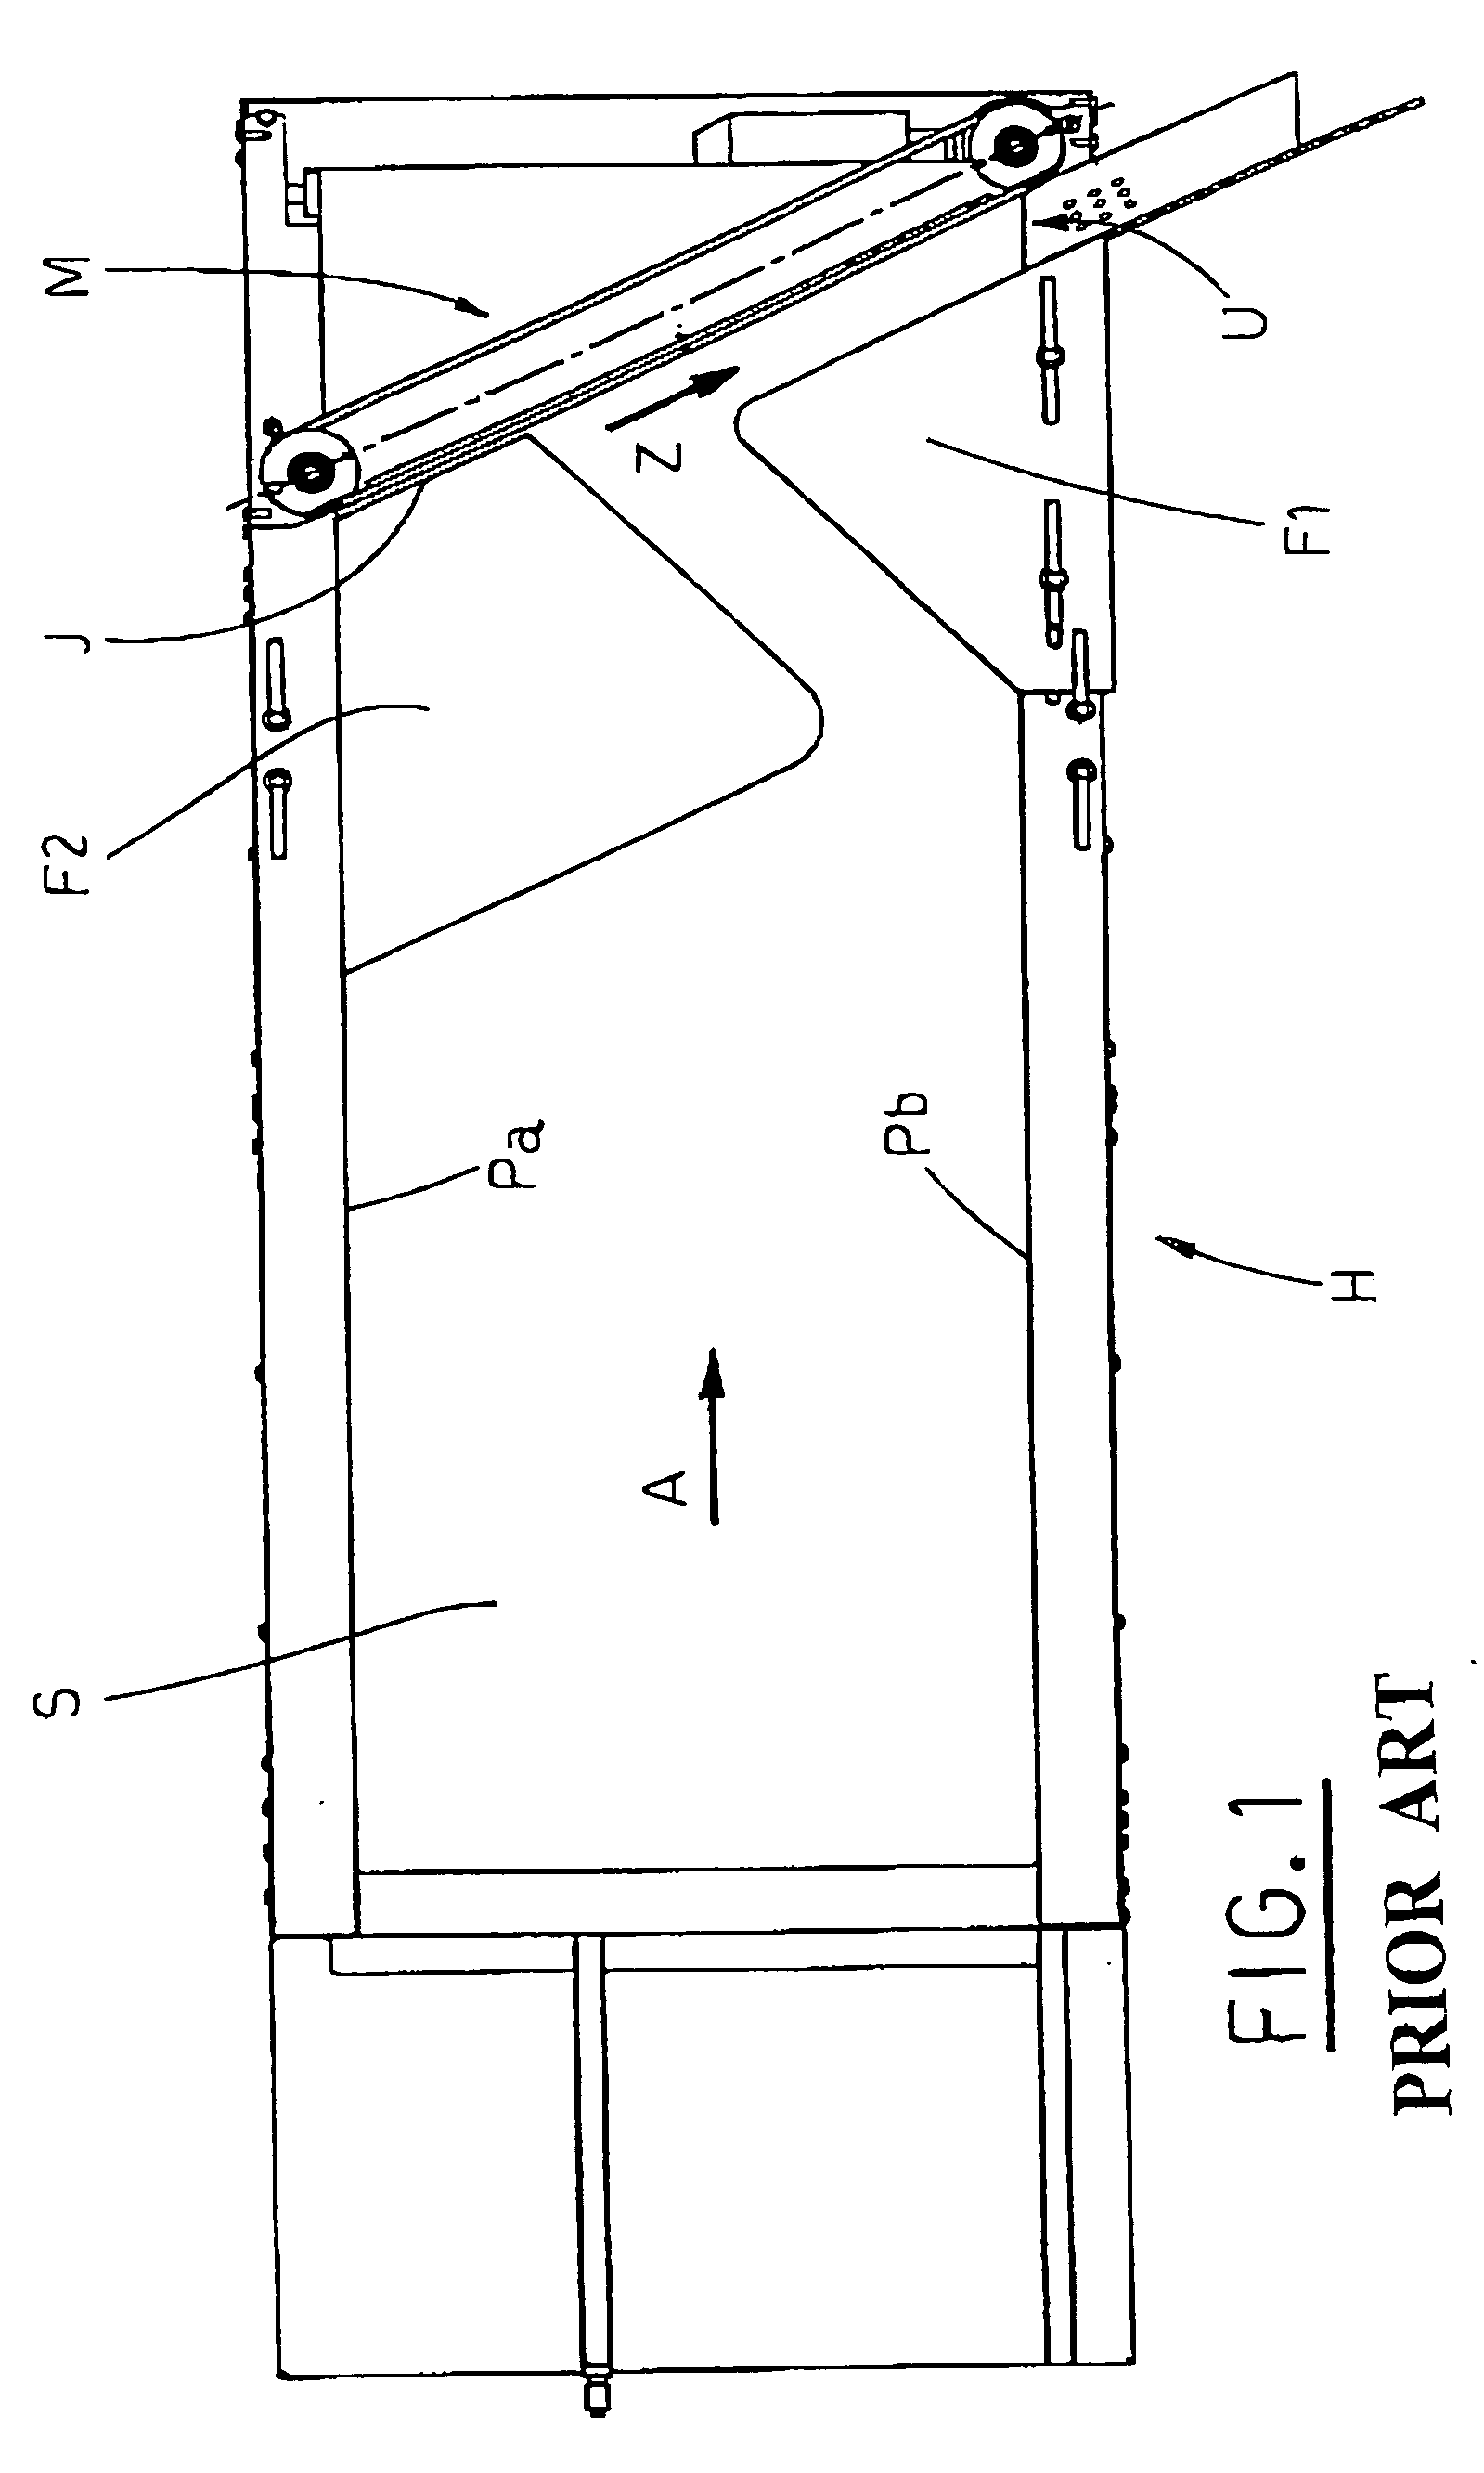 Device for conveying and arranging cylindrical elements, such as bottles, in a row